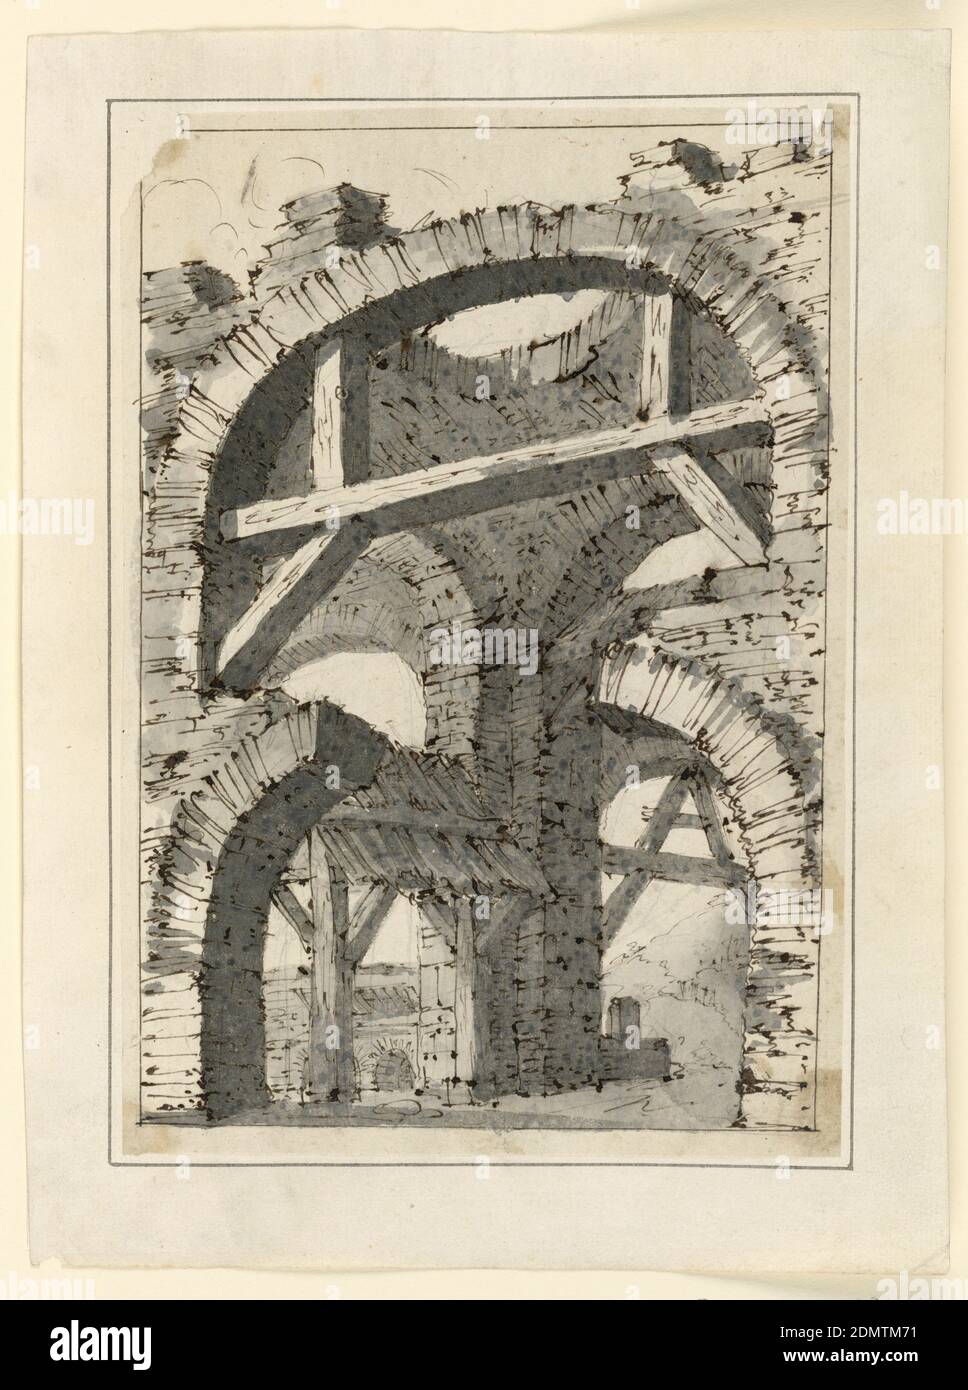 Rough Stone Arches Strengthened by Wooden Beams, Pen and brown ink, brush and gray wash on paper, Vertical rectangle. Arches of town-like buildings in decay supported by wooden beams., Italy, late 18th century, architecture, Drawing Stock Photo